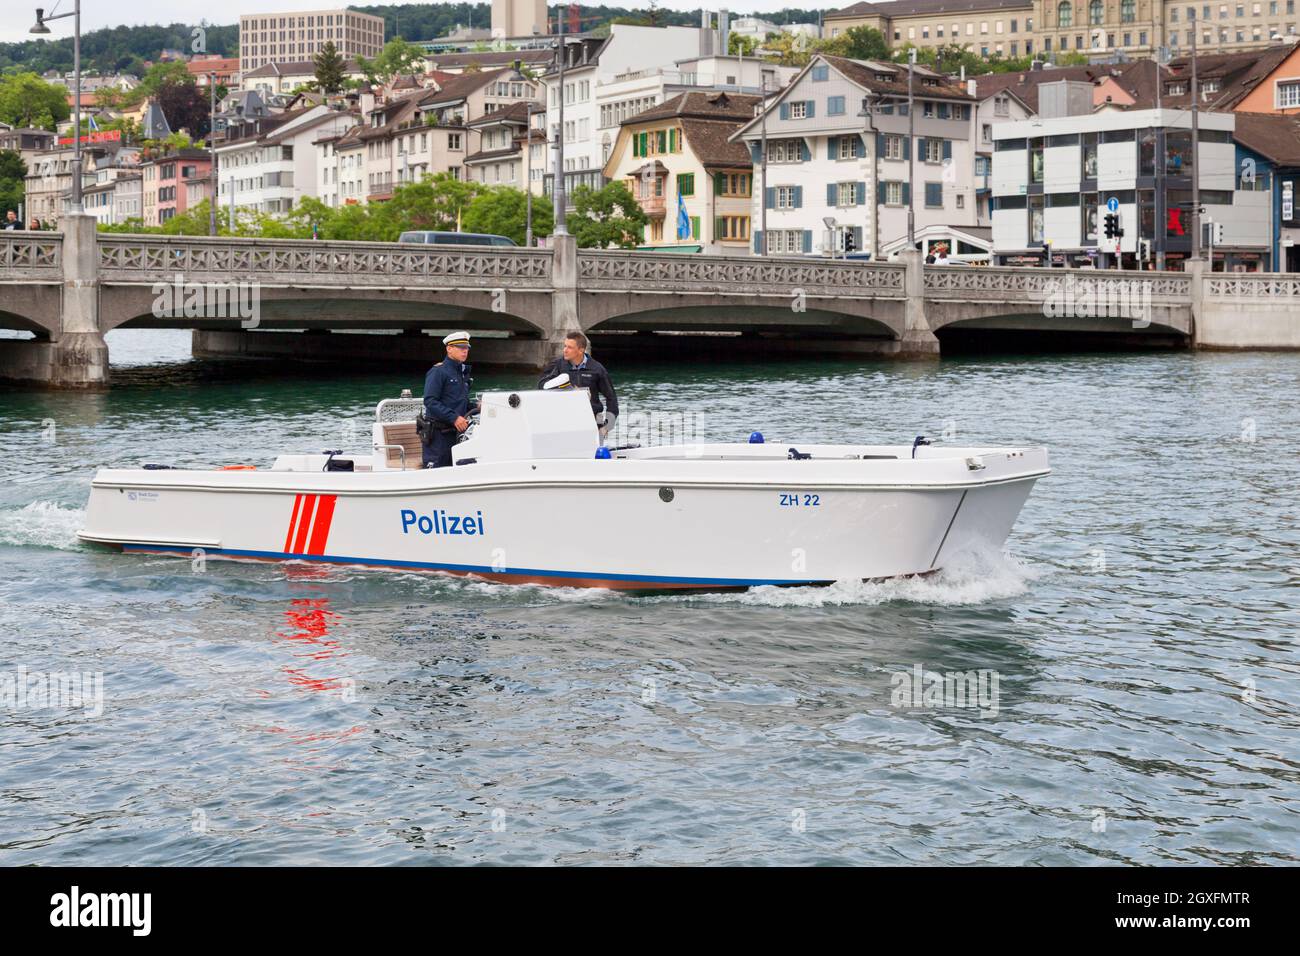 Zurich, Switzerland - June 12 2018: Two police officers navigating on the Limmat river. Stock Photo